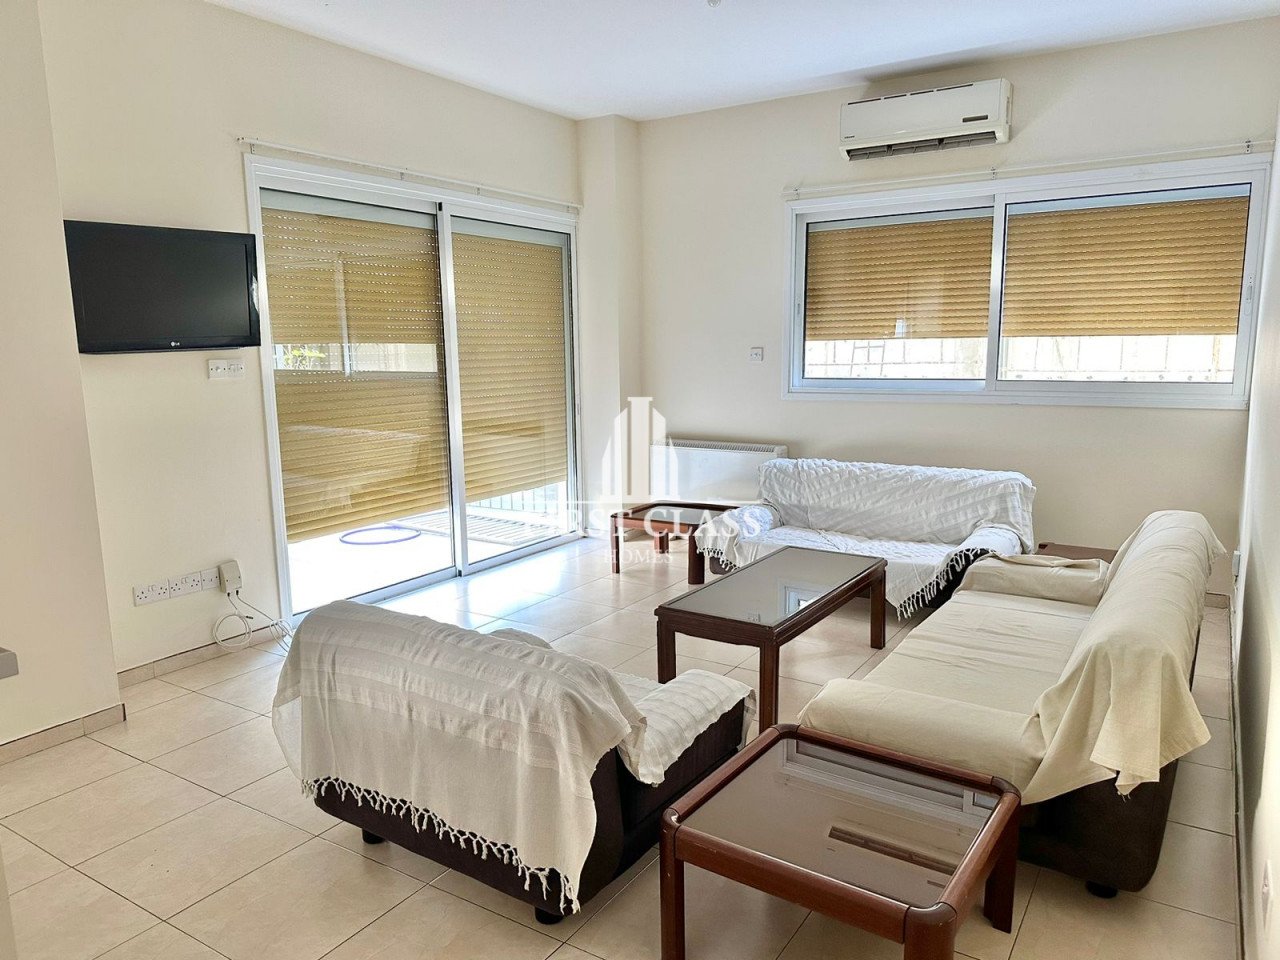 Property for Rent: Ground Floor Apartment (Flat) in Lykavitos, Nicosia for Rent | Key Realtor Cyprus